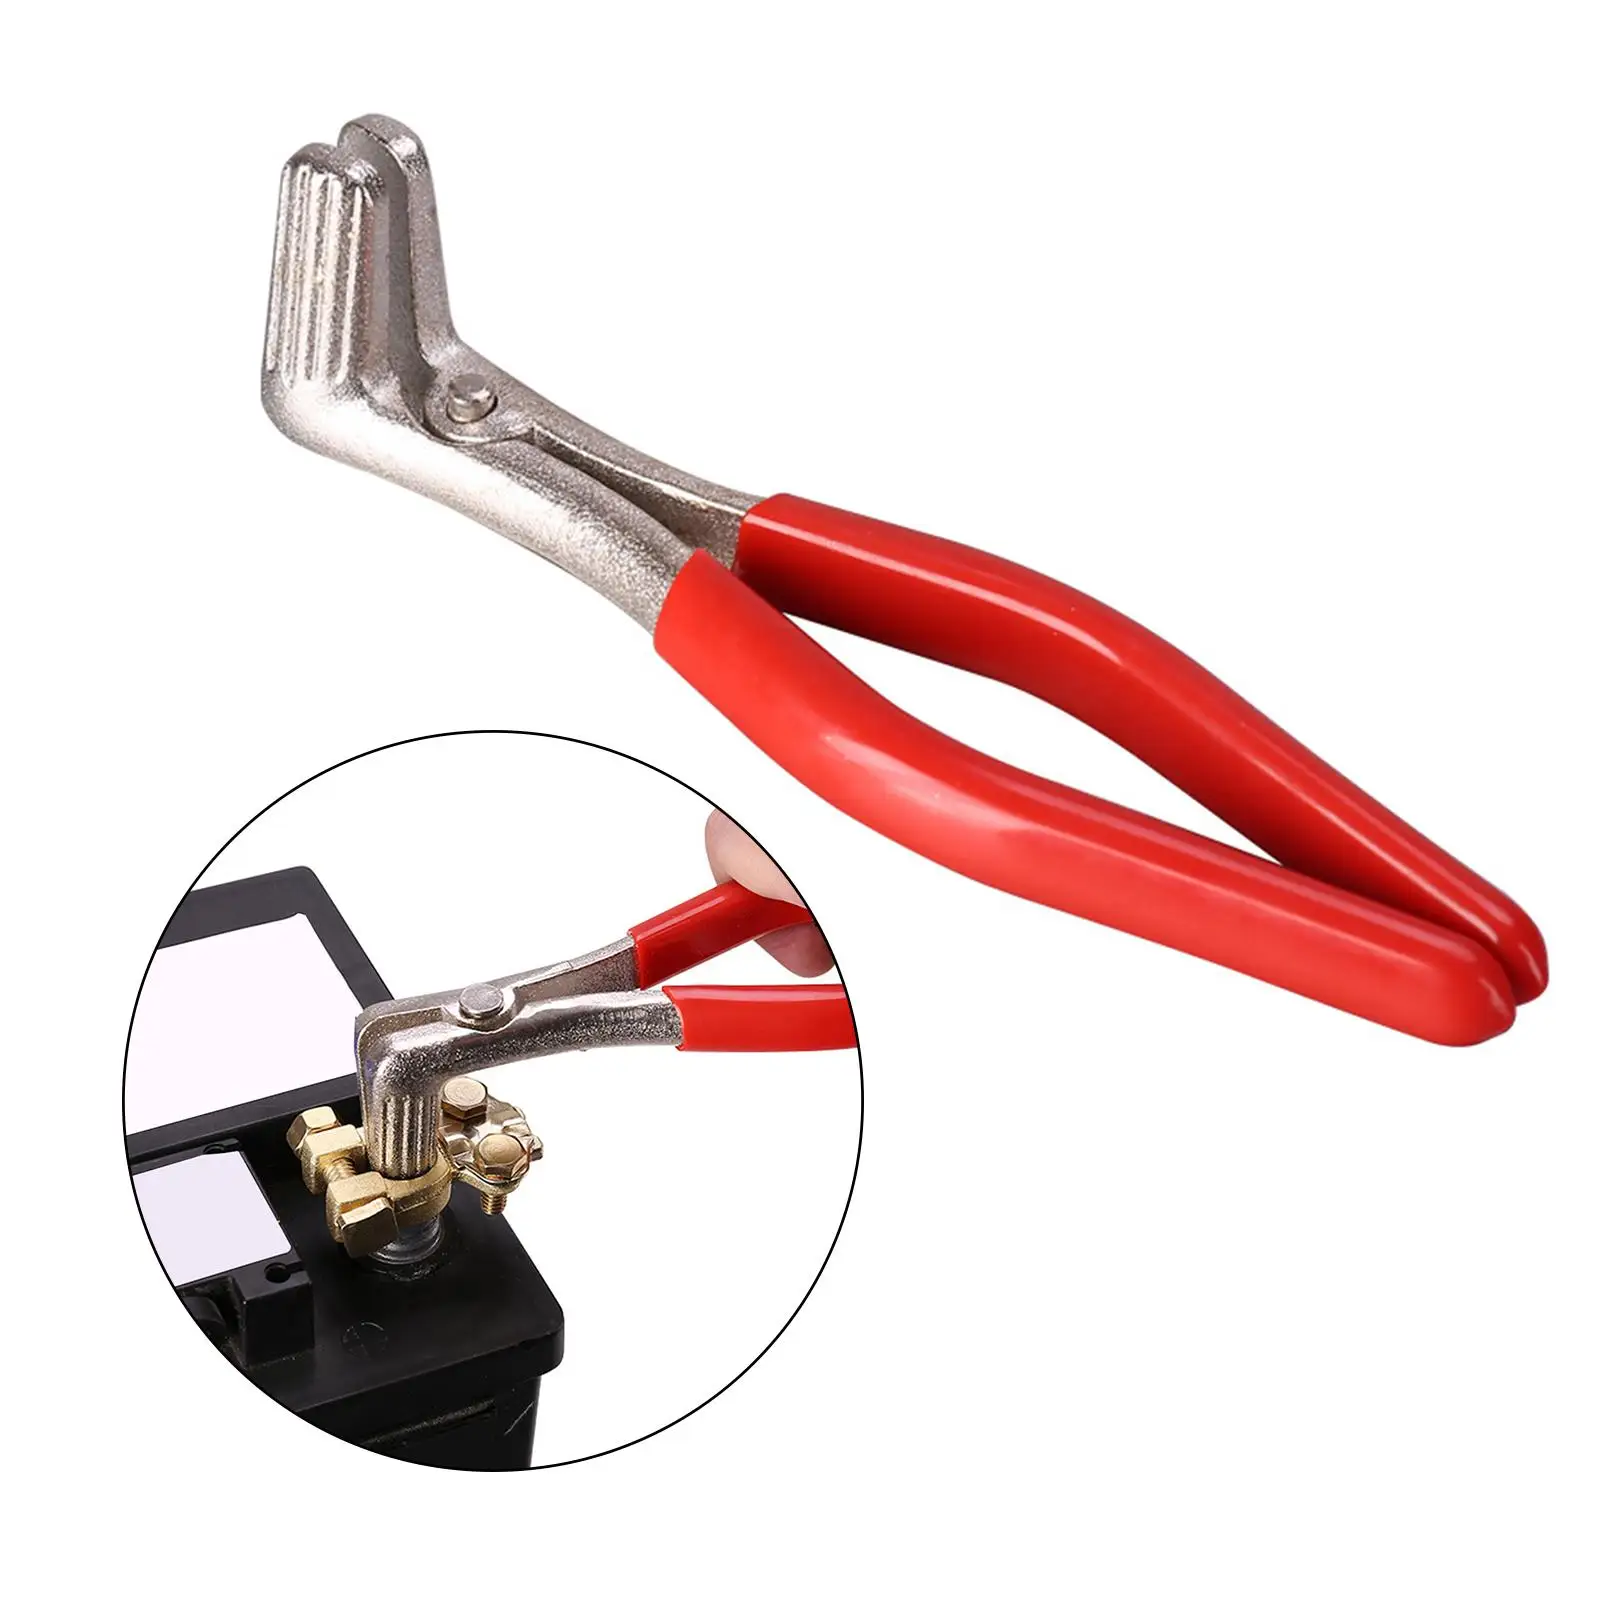 Auto Battery Pliers Multipurpose Automotive Repair Tool Battery Terminal Spreader for Truck Boat UTV Attachments